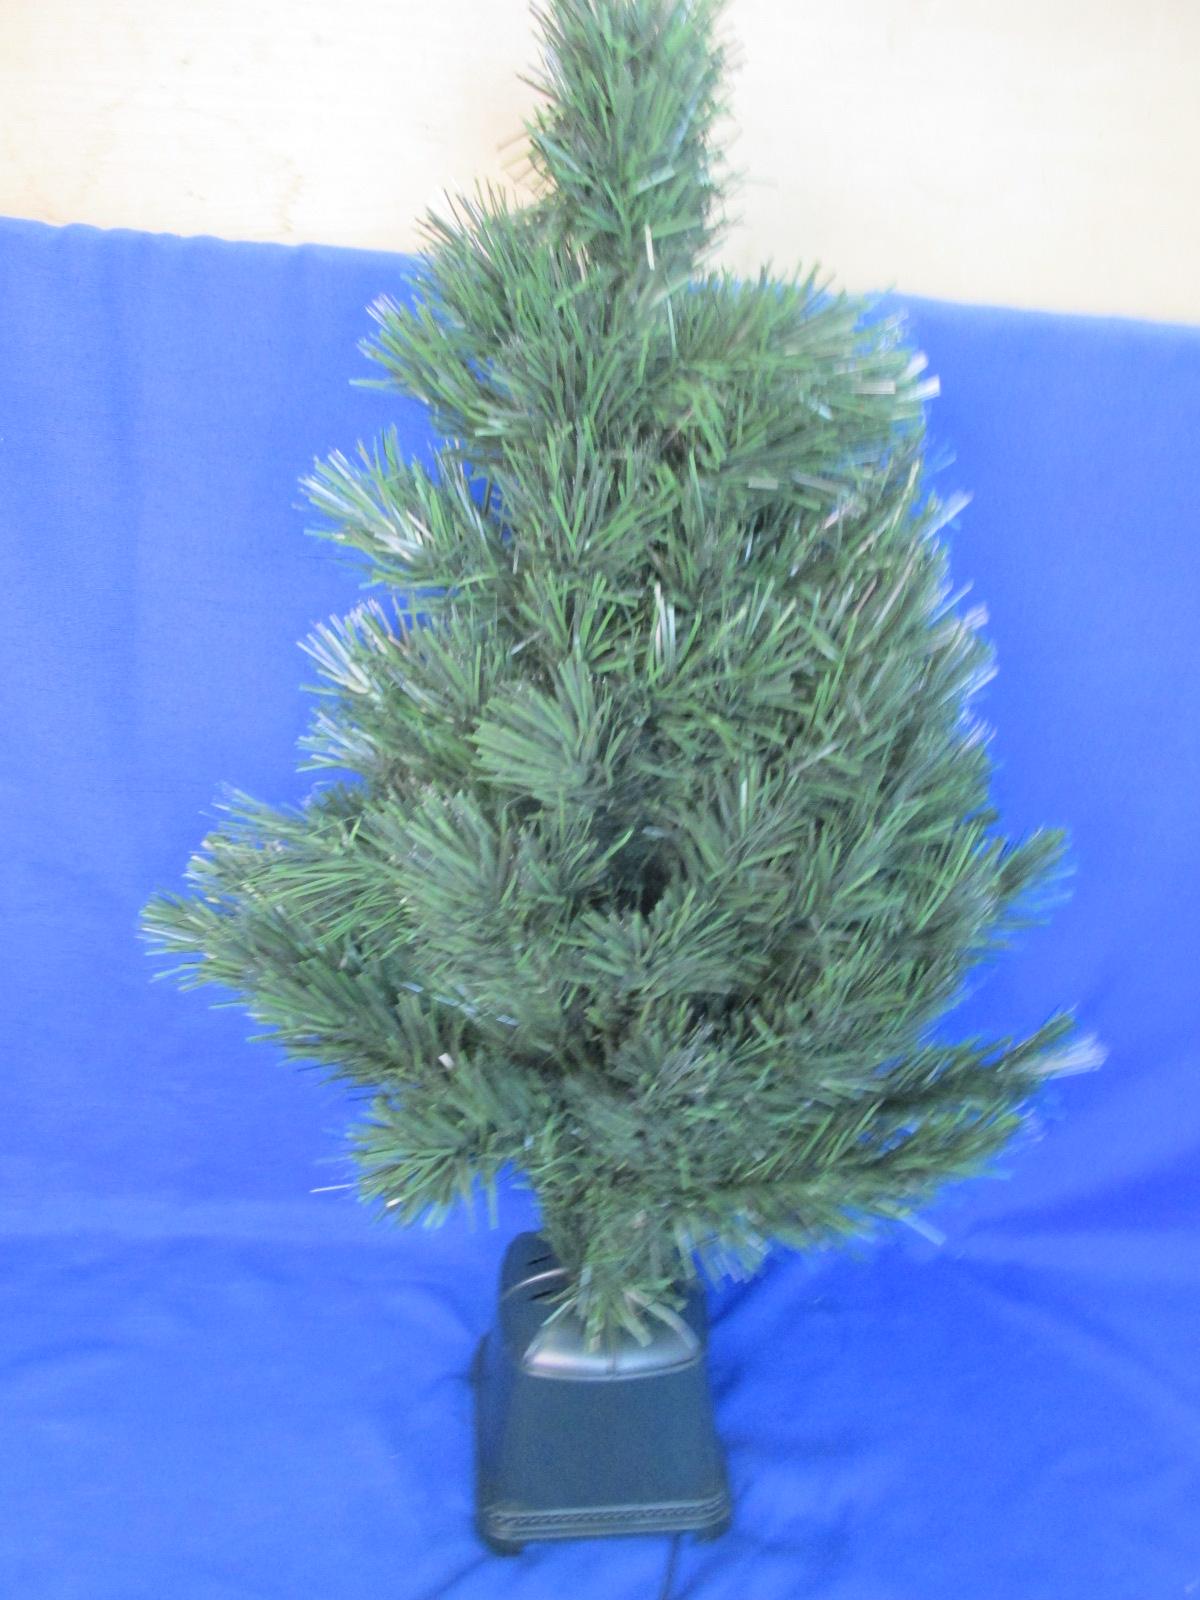 XMAS – 32 Inch Indoor Fiber-Optic Green Tree (Female) – Constantly Changes Color